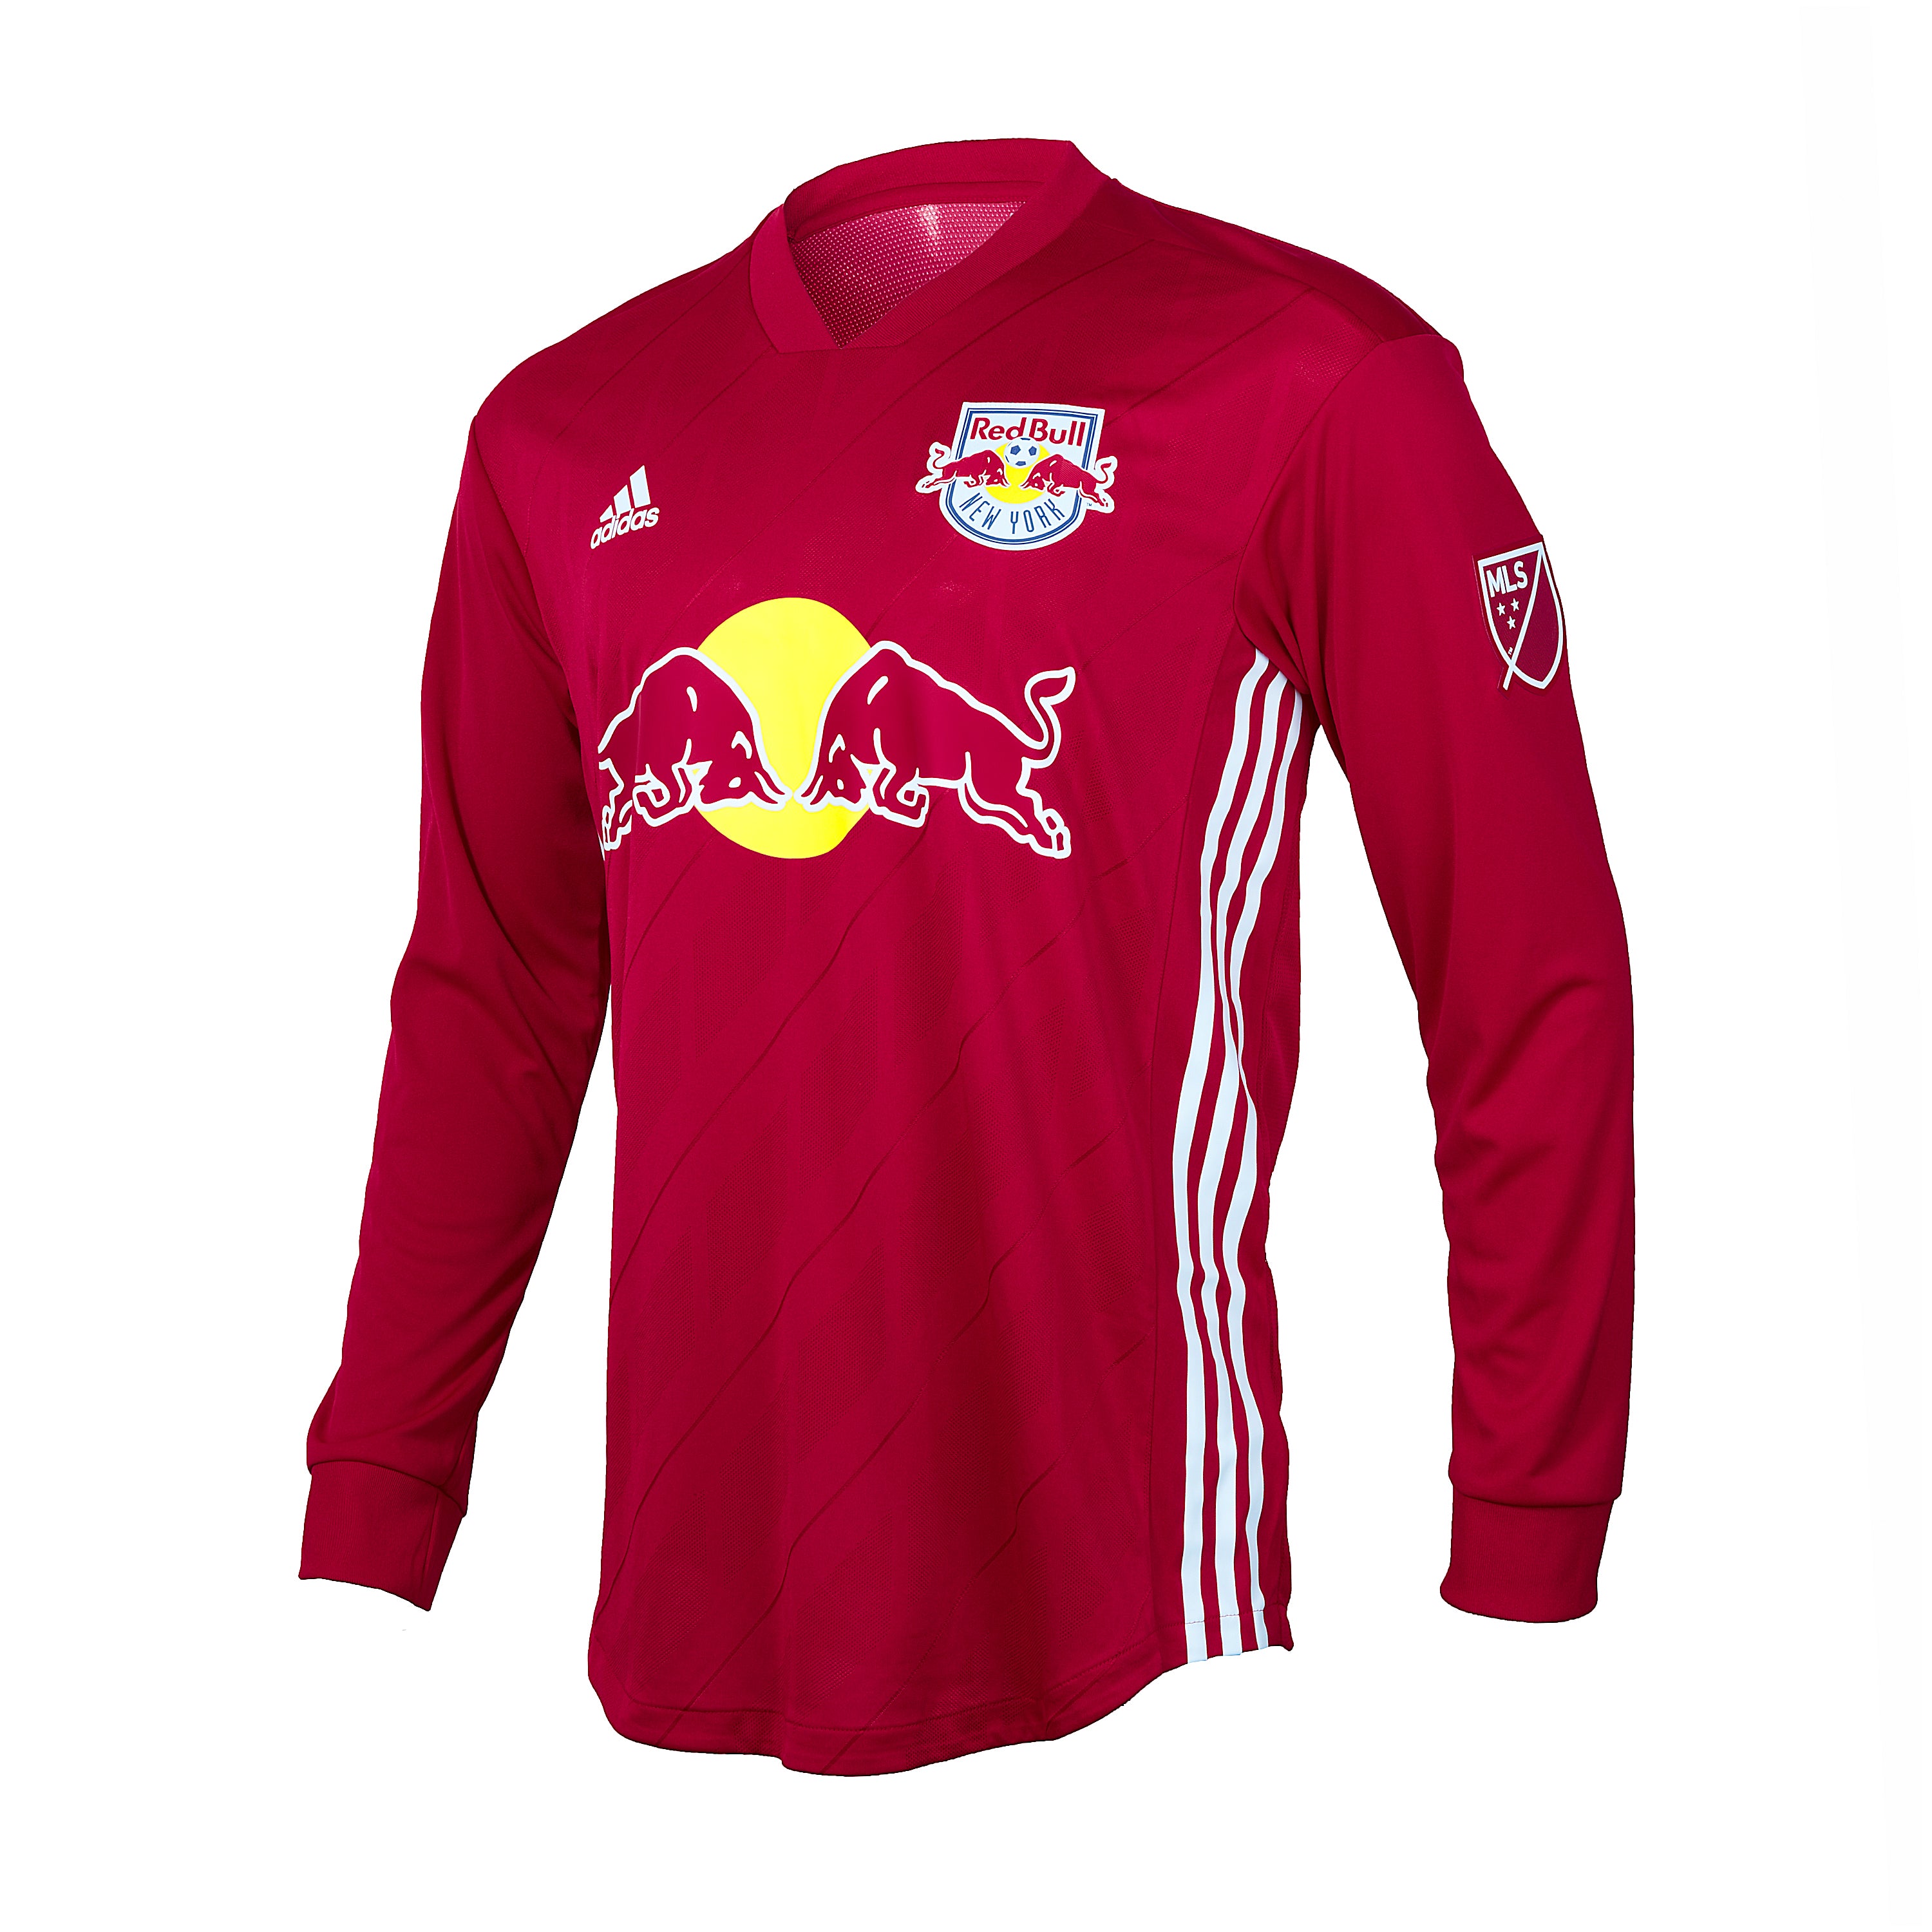 red bull jersey 2018